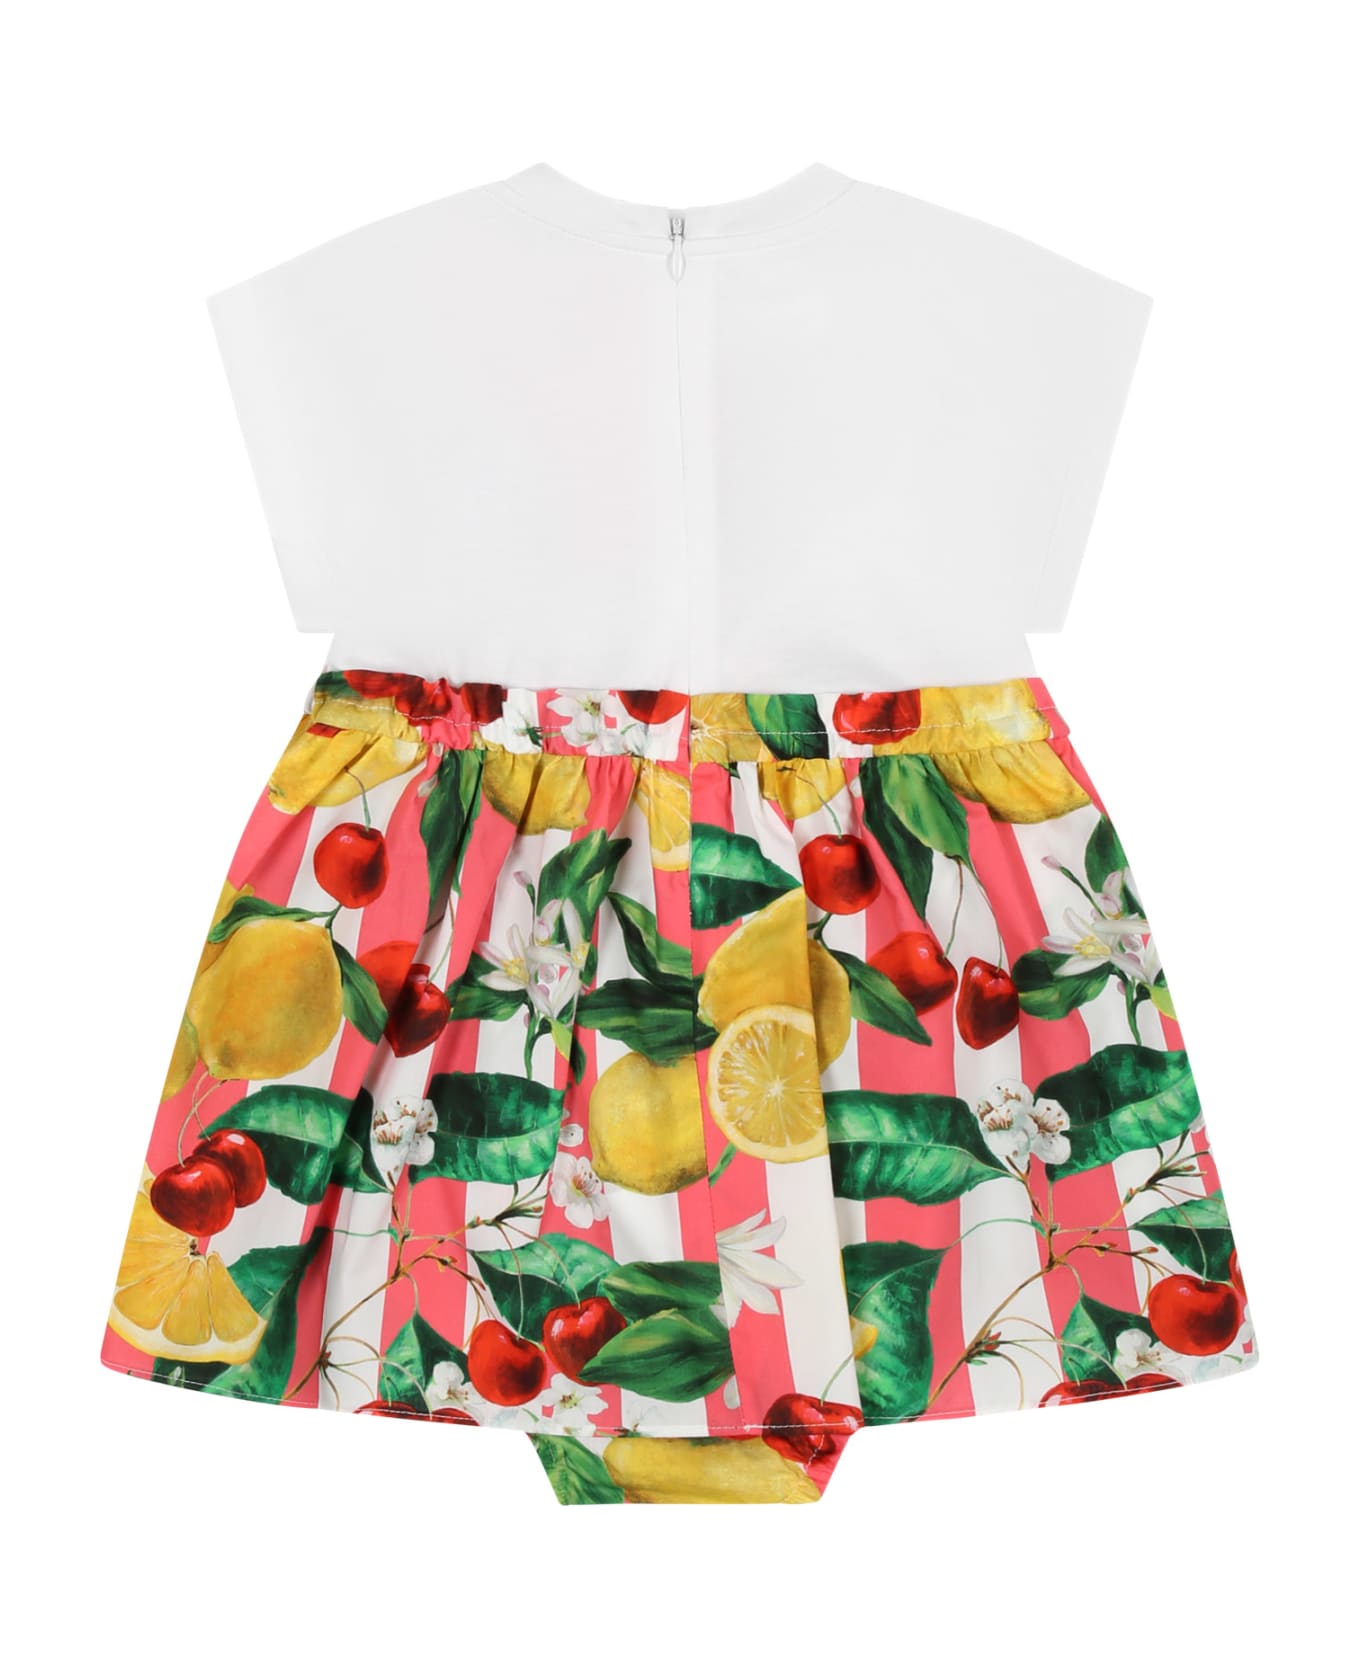 Dolce & Gabbana White Dress For Baby Girl With All-over Multicolor Fruits And Flowers - White ウェア